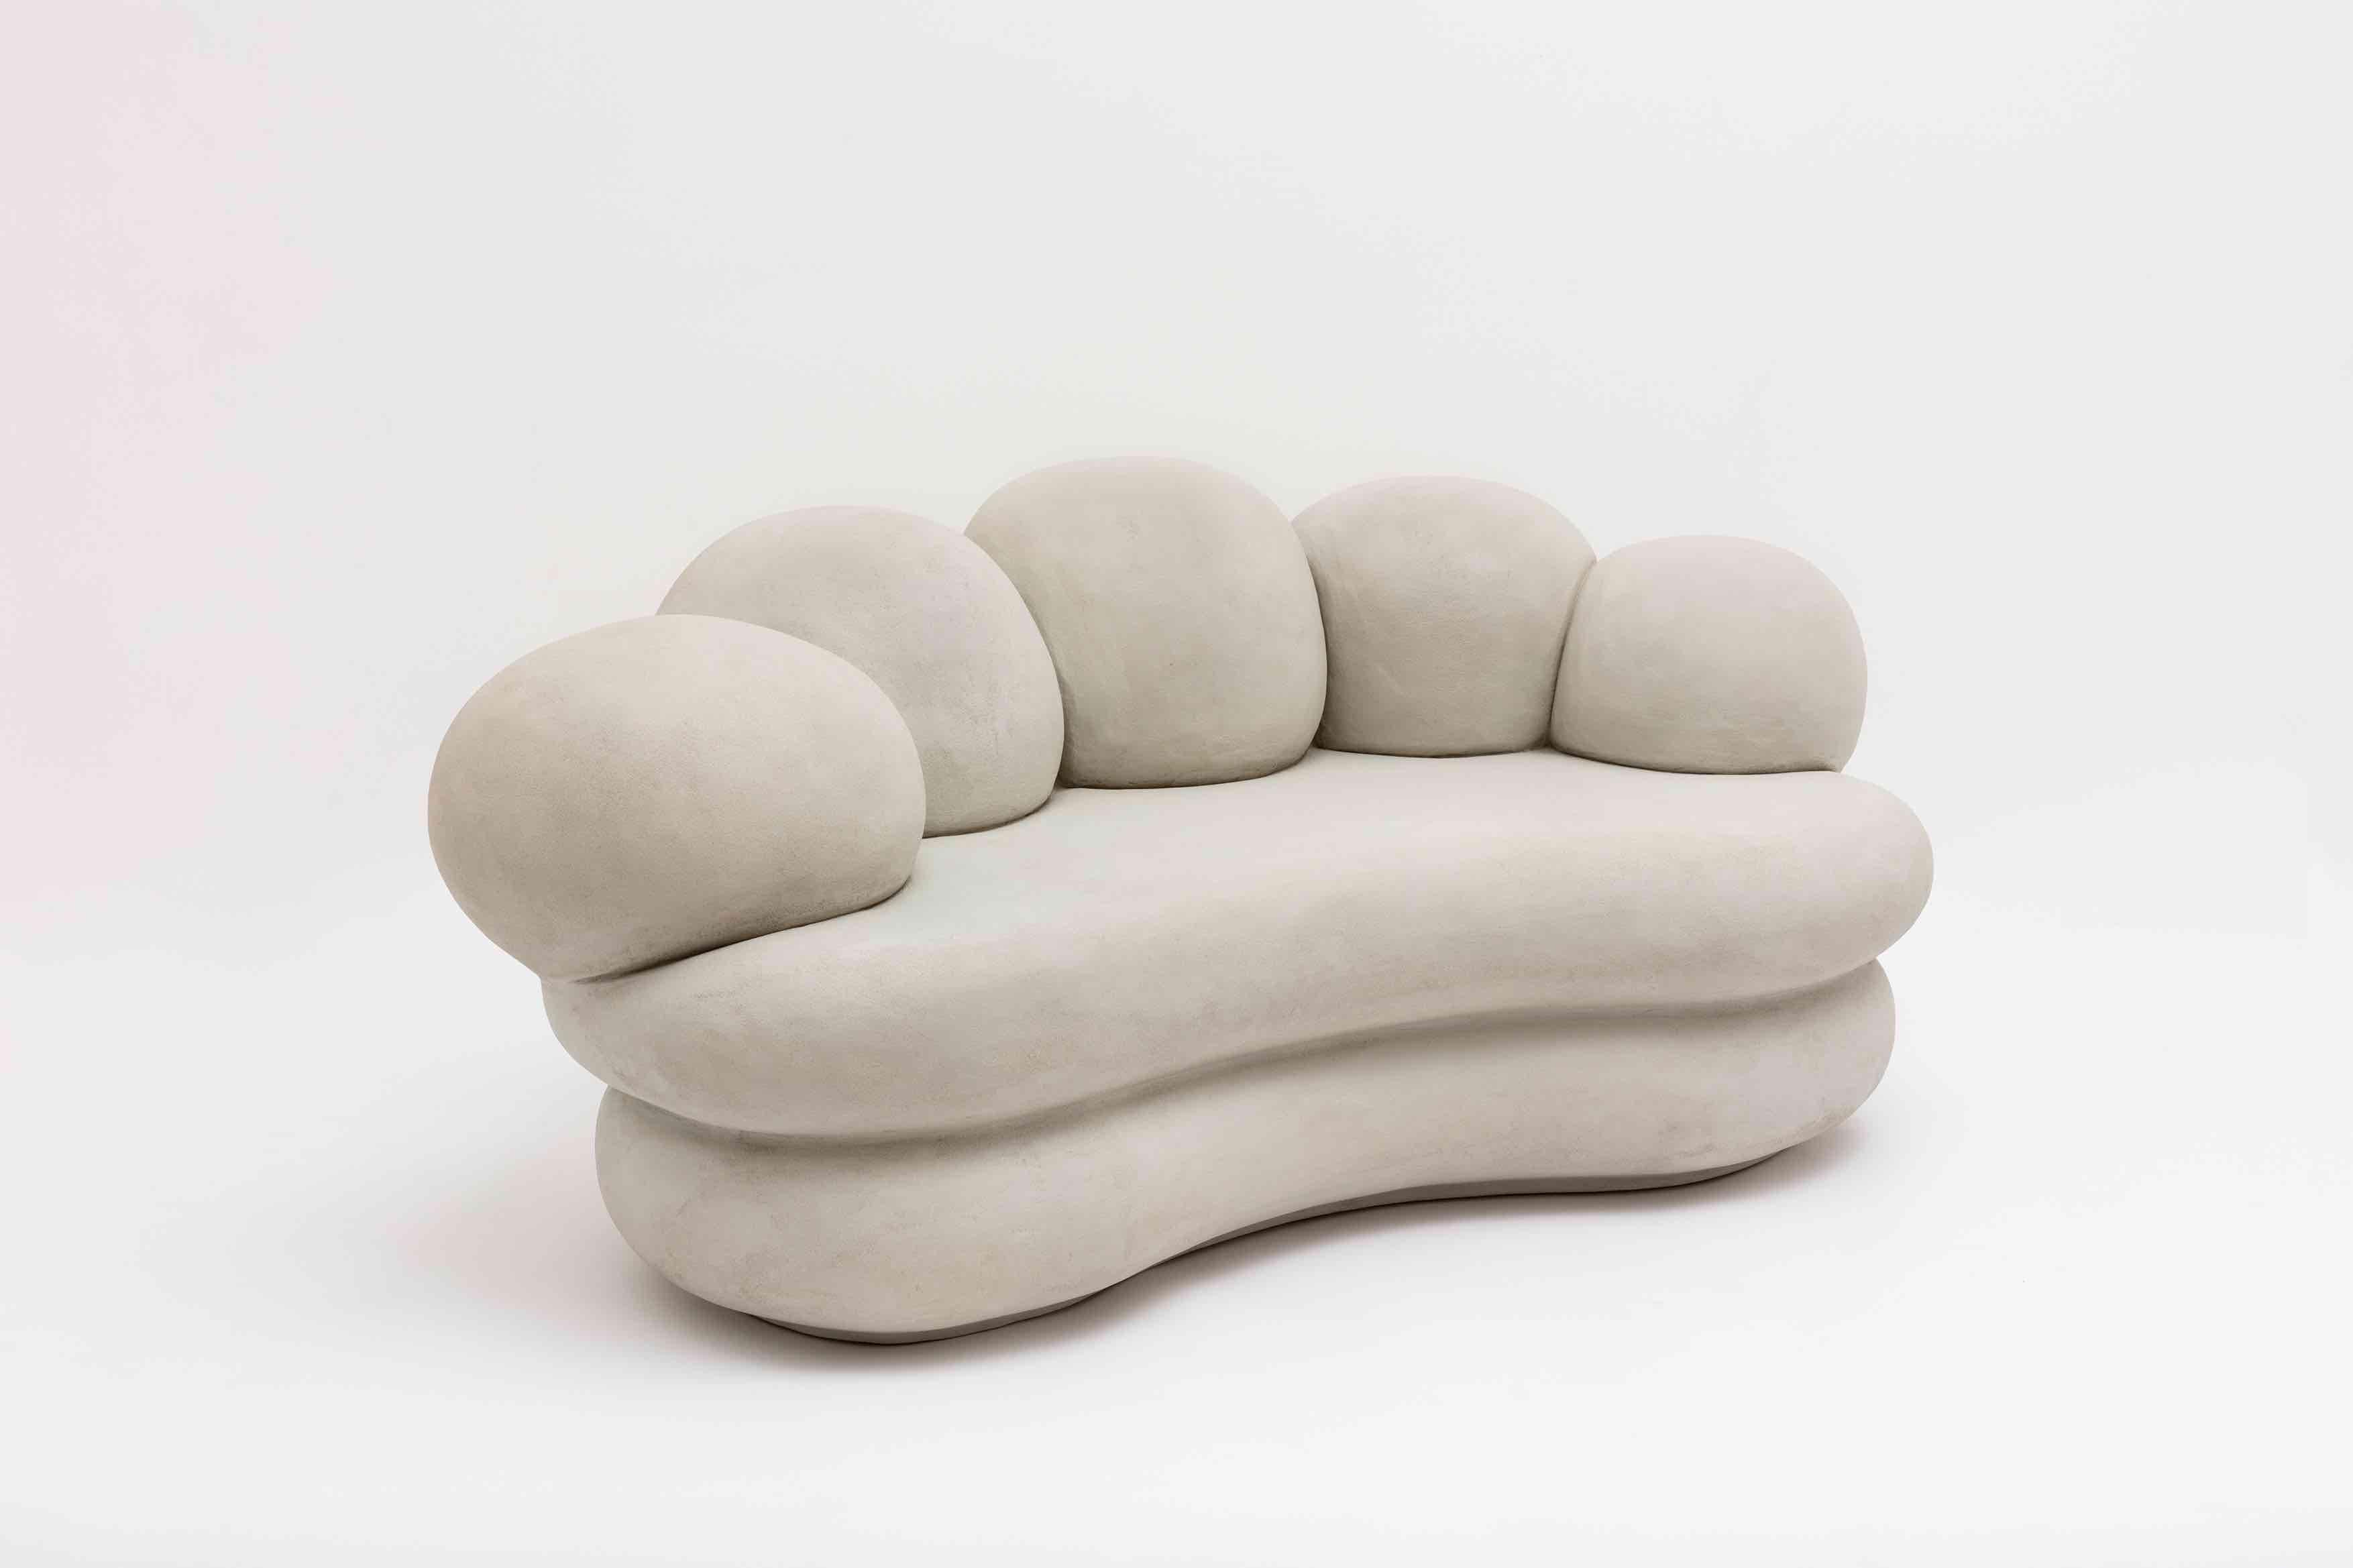 Faye Toogood [British, b. 1977]
Maquette 115 / clay sofa, 2020
Cement composite
Measures: 33.5 x 78.75 x 47.25 inches
85 x 200 x 120 cm

Faye Toogood was born in the UK in 1977 and graduated with a BA in the History of Art in 1998 from Bristol